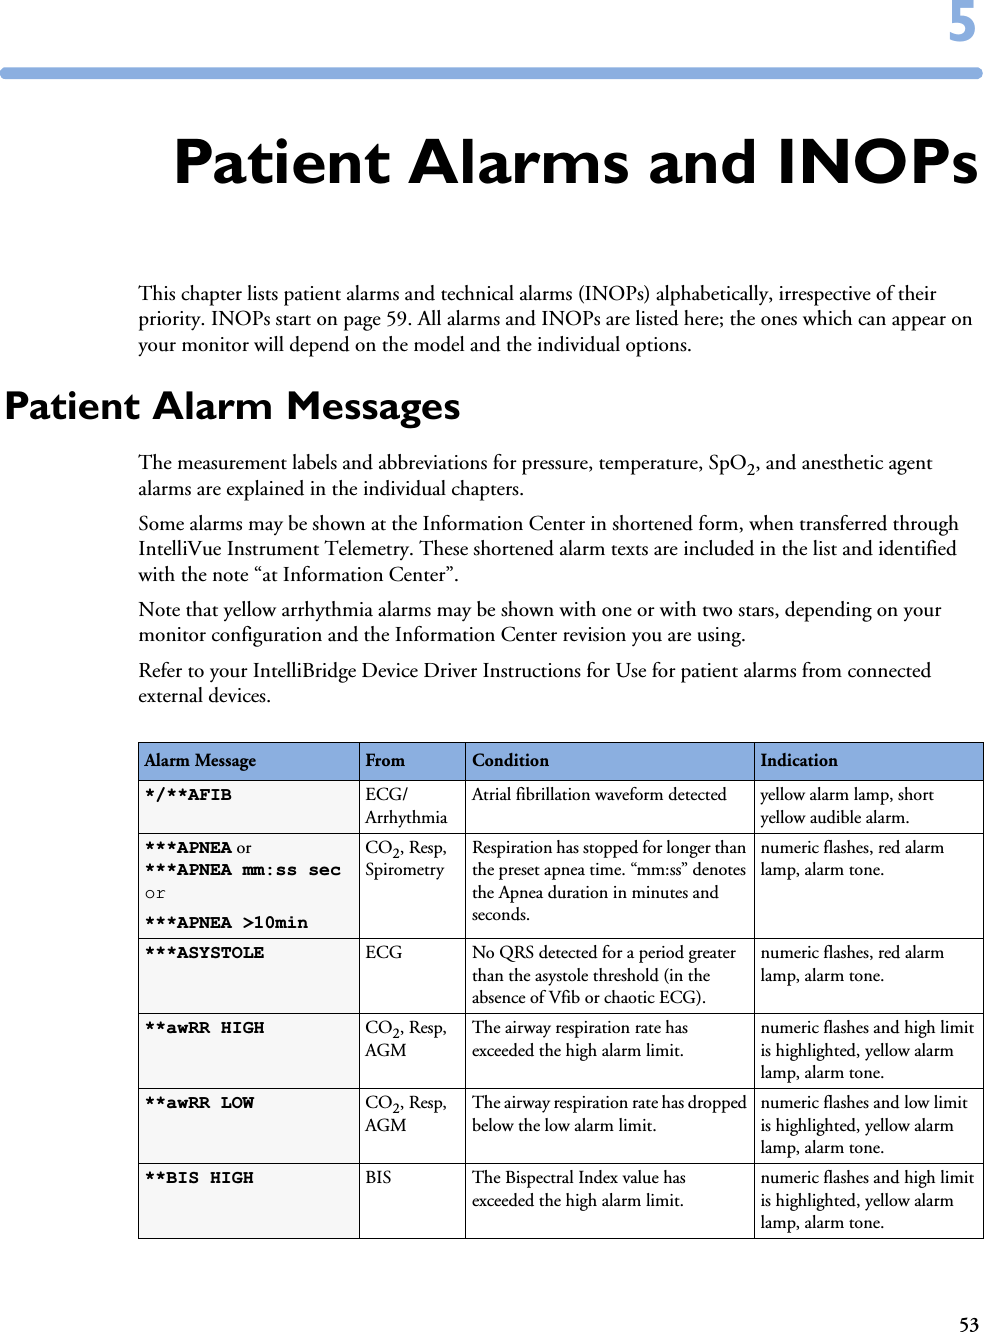 5355Patient Alarms and INOPsThis chapter lists patient alarms and technical alarms (INOPs) alphabetically, irrespective of their priority. INOPs start on page 59. All alarms and INOPs are listed here; the ones which can appear on your monitor will depend on the model and the individual options. Patient Alarm MessagesThe measurement labels and abbreviations for pressure, temperature, SpO2, and anesthetic agent alarms are explained in the individual chapters. Some alarms may be shown at the Information Center in shortened form, when transferred through IntelliVue Instrument Telemetry. These shortened alarm texts are included in the list and identified with the note “at Information Center”.Note that yellow arrhythmia alarms may be shown with one or with two stars, depending on your monitor configuration and the Information Center revision you are using.Refer to your IntelliBridge Device Driver Instructions for Use for patient alarms from connected external devices. Alarm Message From Condition Indication*/**AFIB ECG/ArrhythmiaAtrial fibrillation waveform detected yellow alarm lamp, short yellow audible alarm.***APNEA or***APNEA mm:ss sec or***APNEA &gt;10minCO2, Resp, SpirometryRespiration has stopped for longer than the preset apnea time. “mm:ss” denotes the Apnea duration in minutes and seconds. numeric flashes, red alarm lamp, alarm tone. ***ASYSTOLE ECG No QRS detected for a period greater than the asystole threshold (in the absence of Vfib or chaotic ECG).numeric flashes, red alarm lamp, alarm tone.**awRR HIGH CO2, Resp, AGMThe airway respiration rate has exceeded the high alarm limit.numeric flashes and high limit is highlighted, yellow alarm lamp, alarm tone.**awRR LOW CO2, Resp, AGMThe airway respiration rate has dropped below the low alarm limit.numeric flashes and low limit is highlighted, yellow alarm lamp, alarm tone.**BIS HIGH BIS The Bispectral Index value has exceeded the high alarm limit.numeric flashes and high limit is highlighted, yellow alarm lamp, alarm tone.